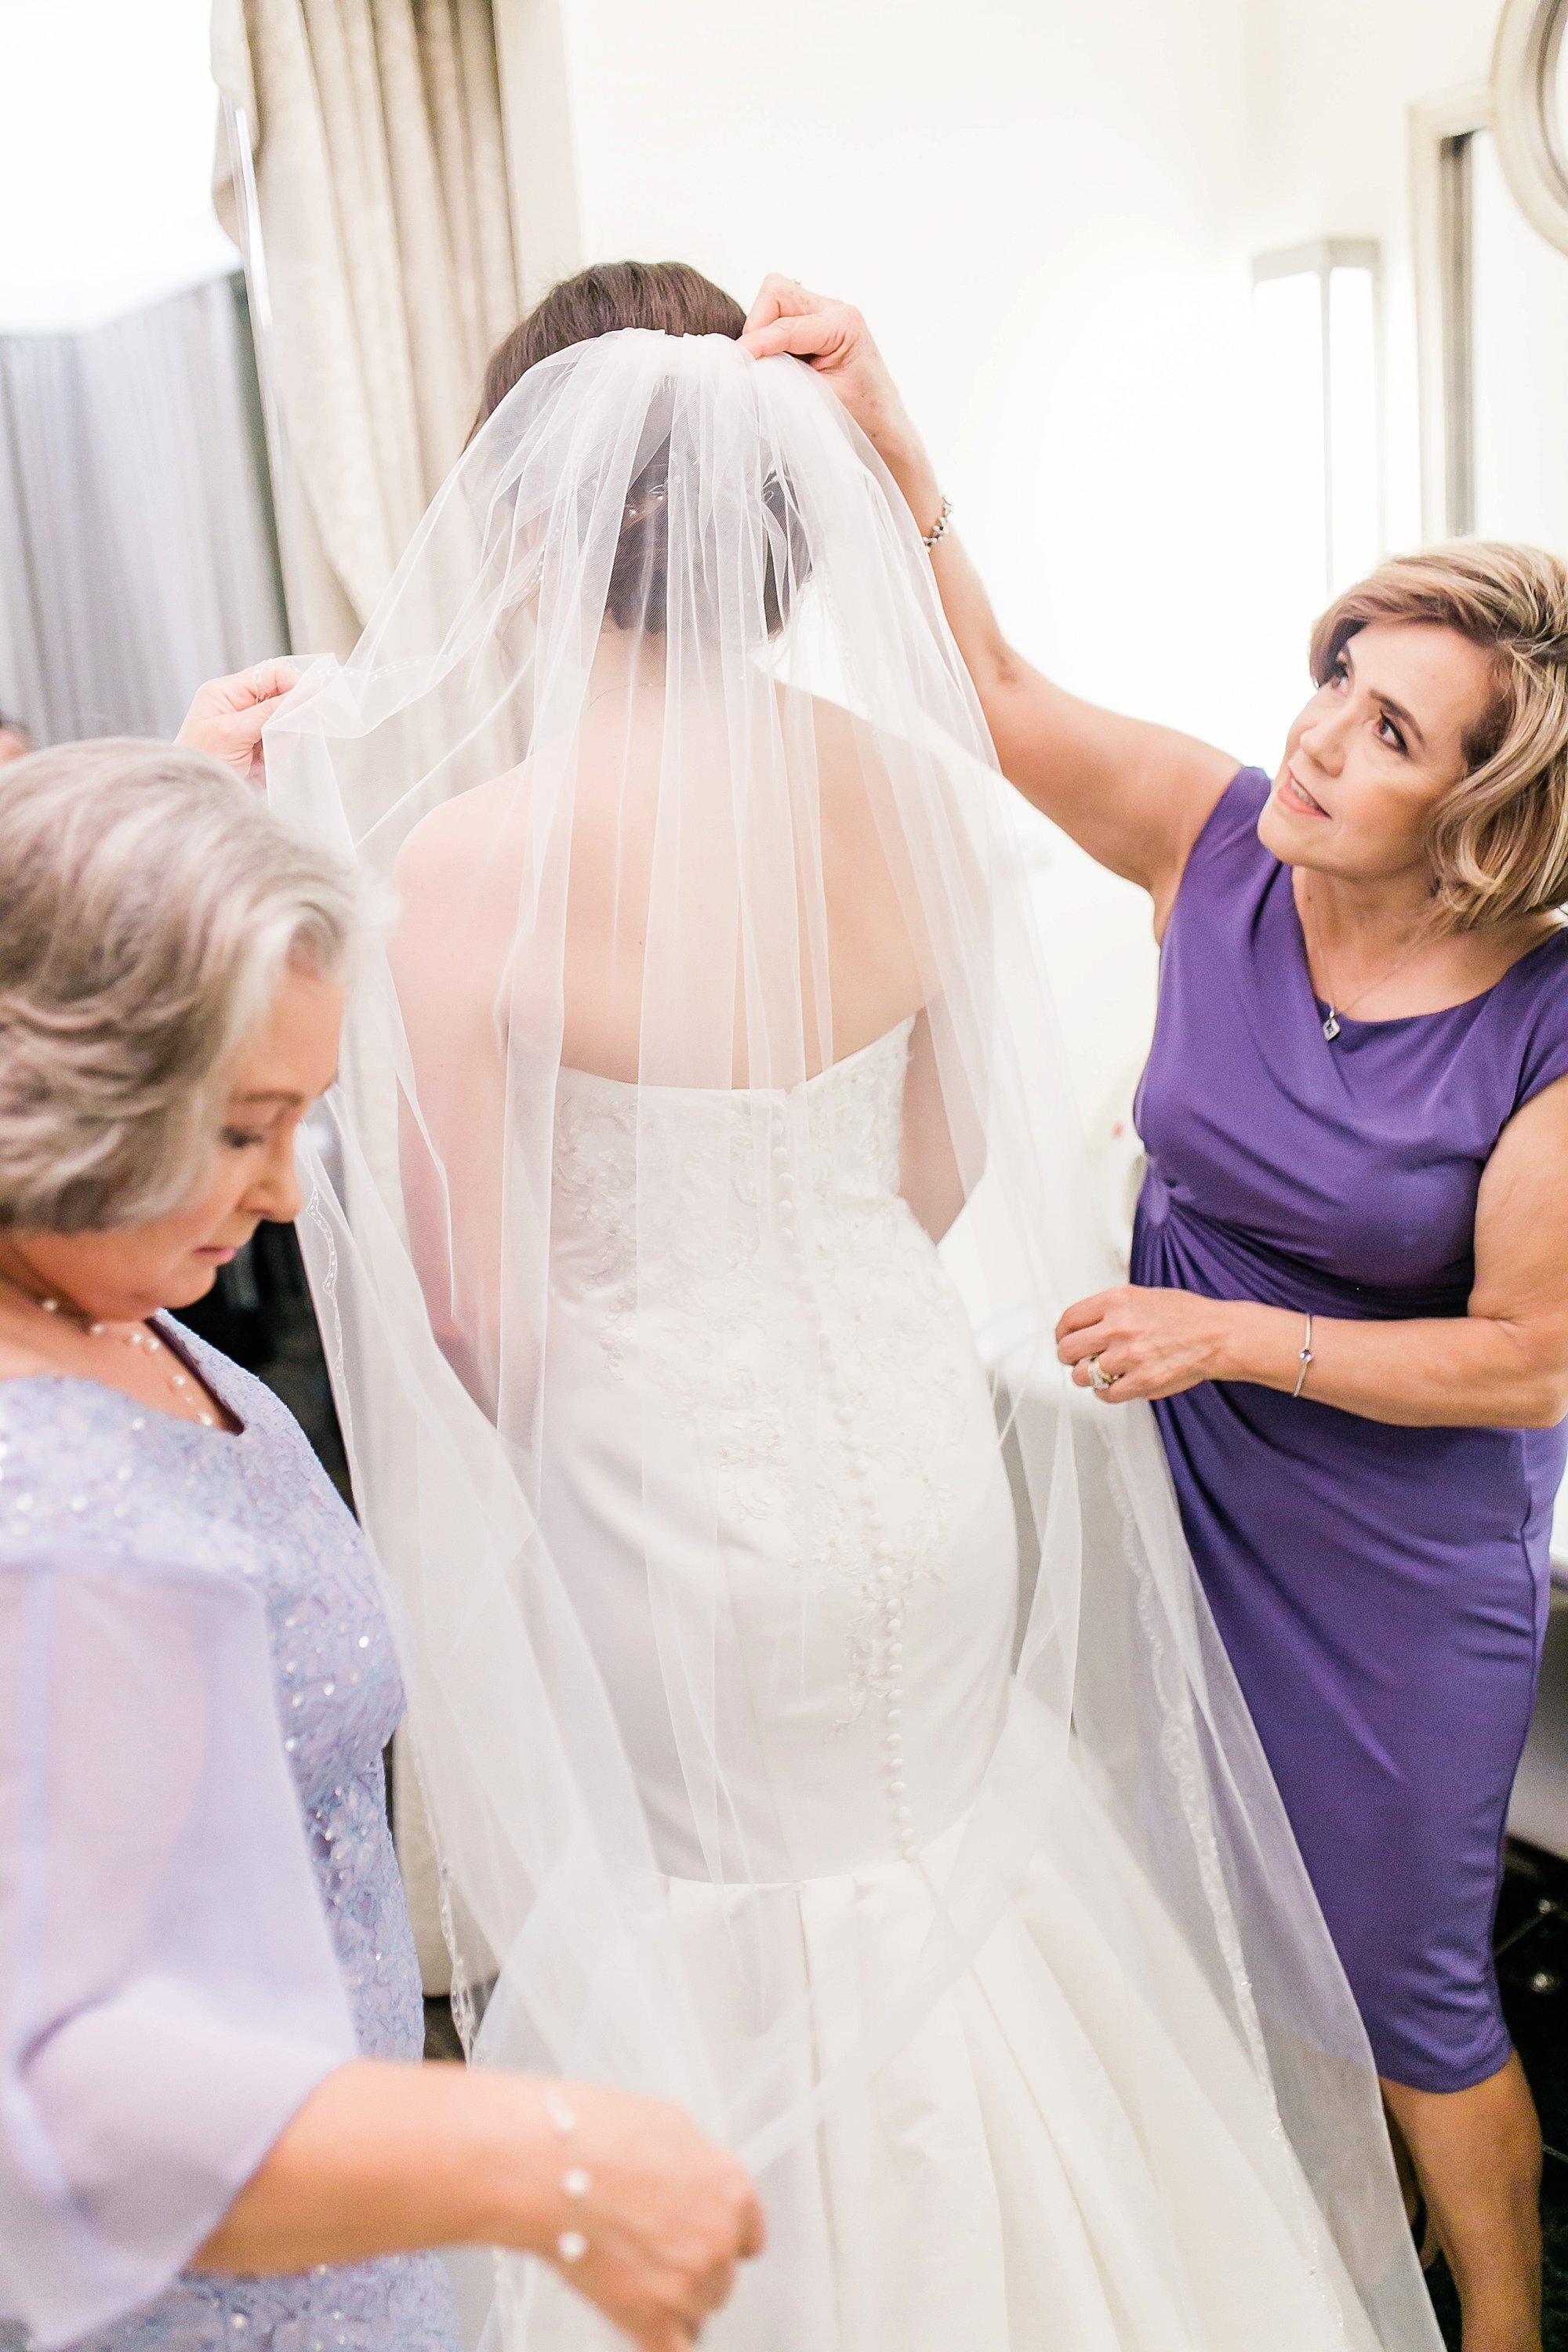  mother helping the bride get ready 